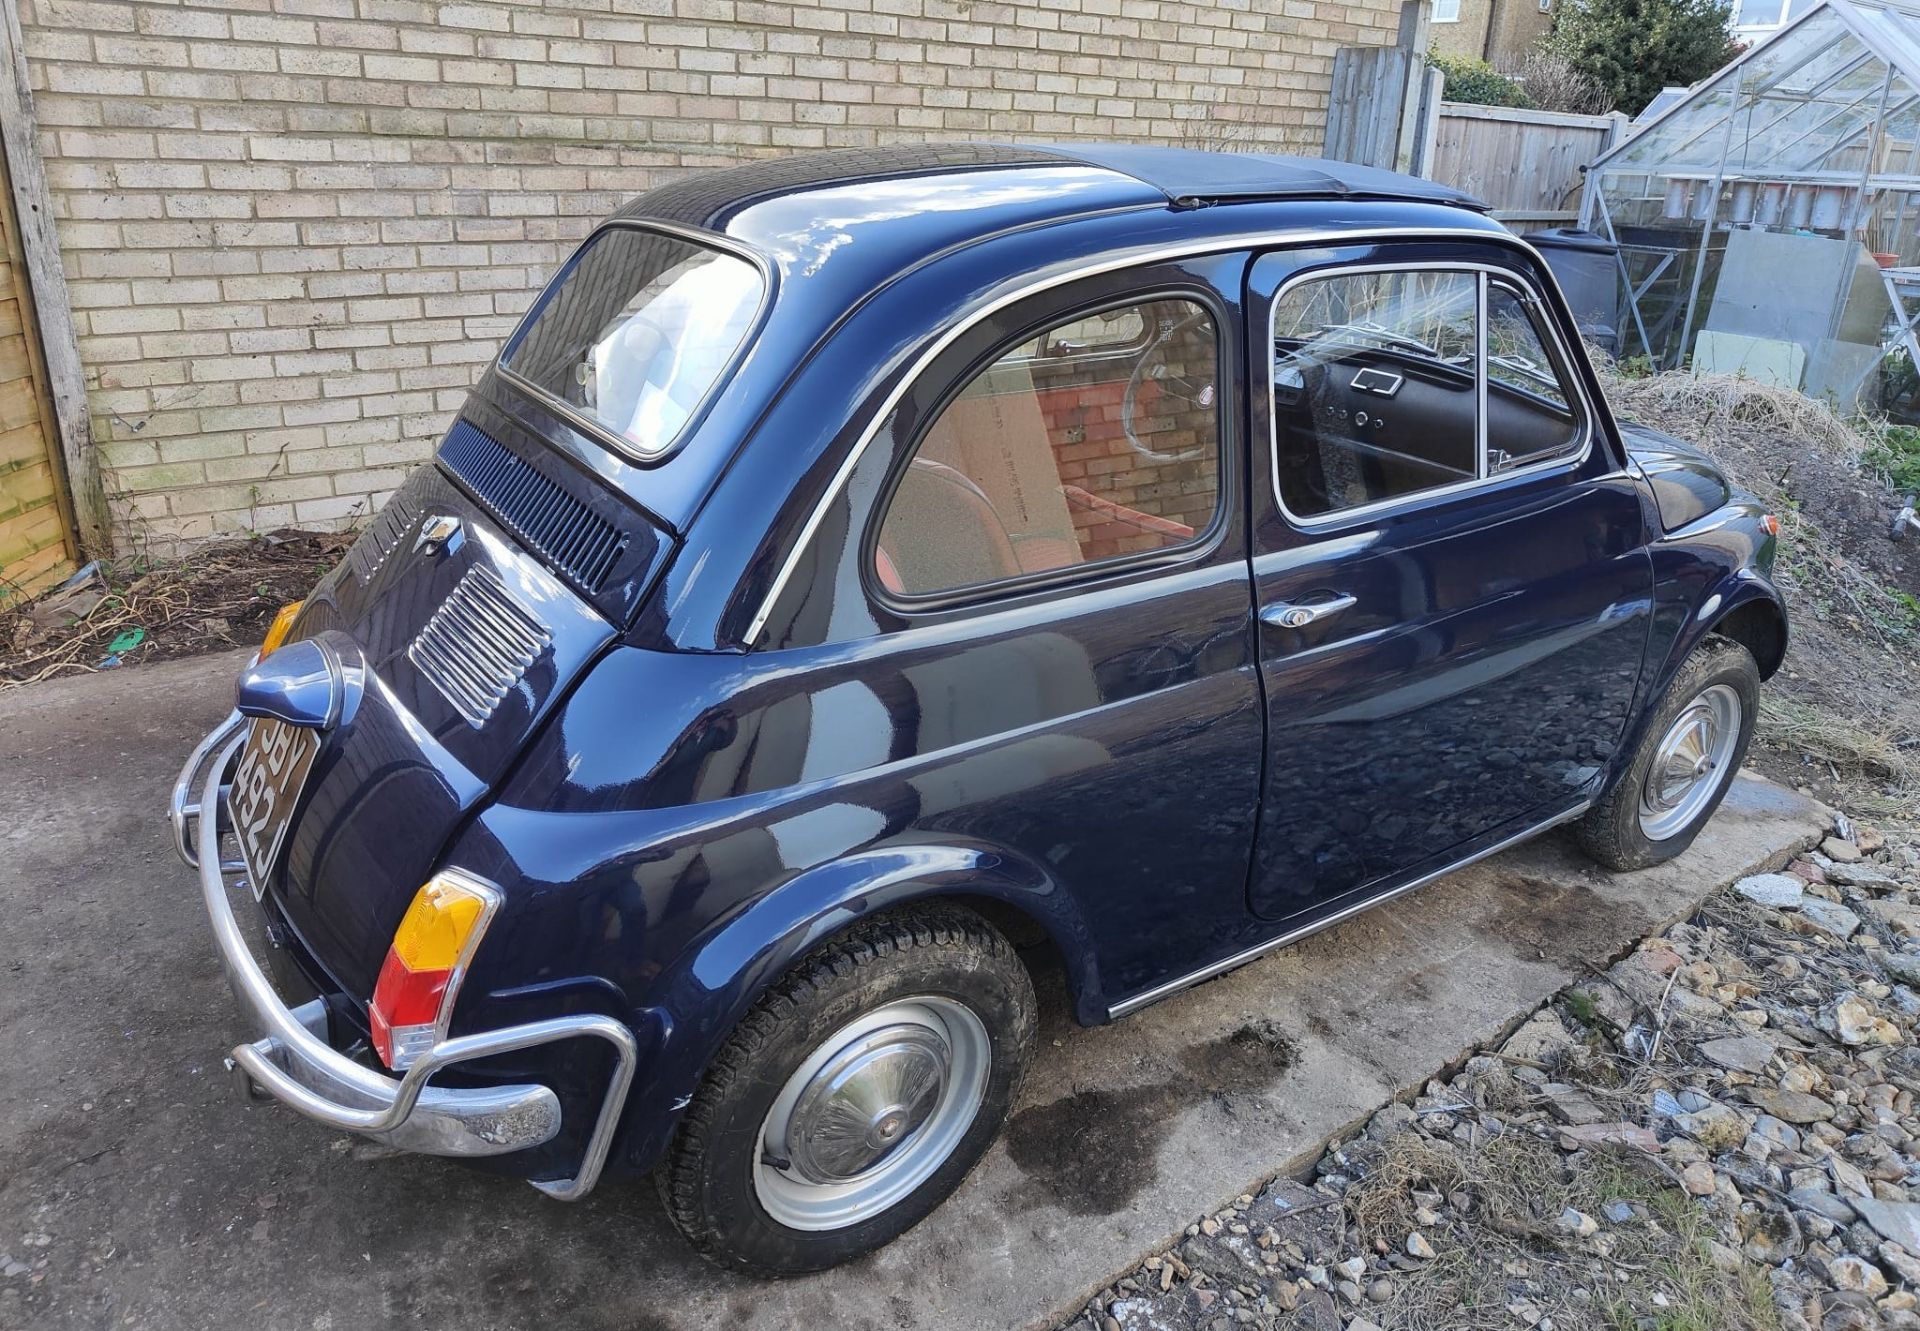 1971 FIAT 500L SALOON Registration Number: JBY 492J Chassis Number: TBA Recorded Mileage: 40,300 - Image 3 of 13